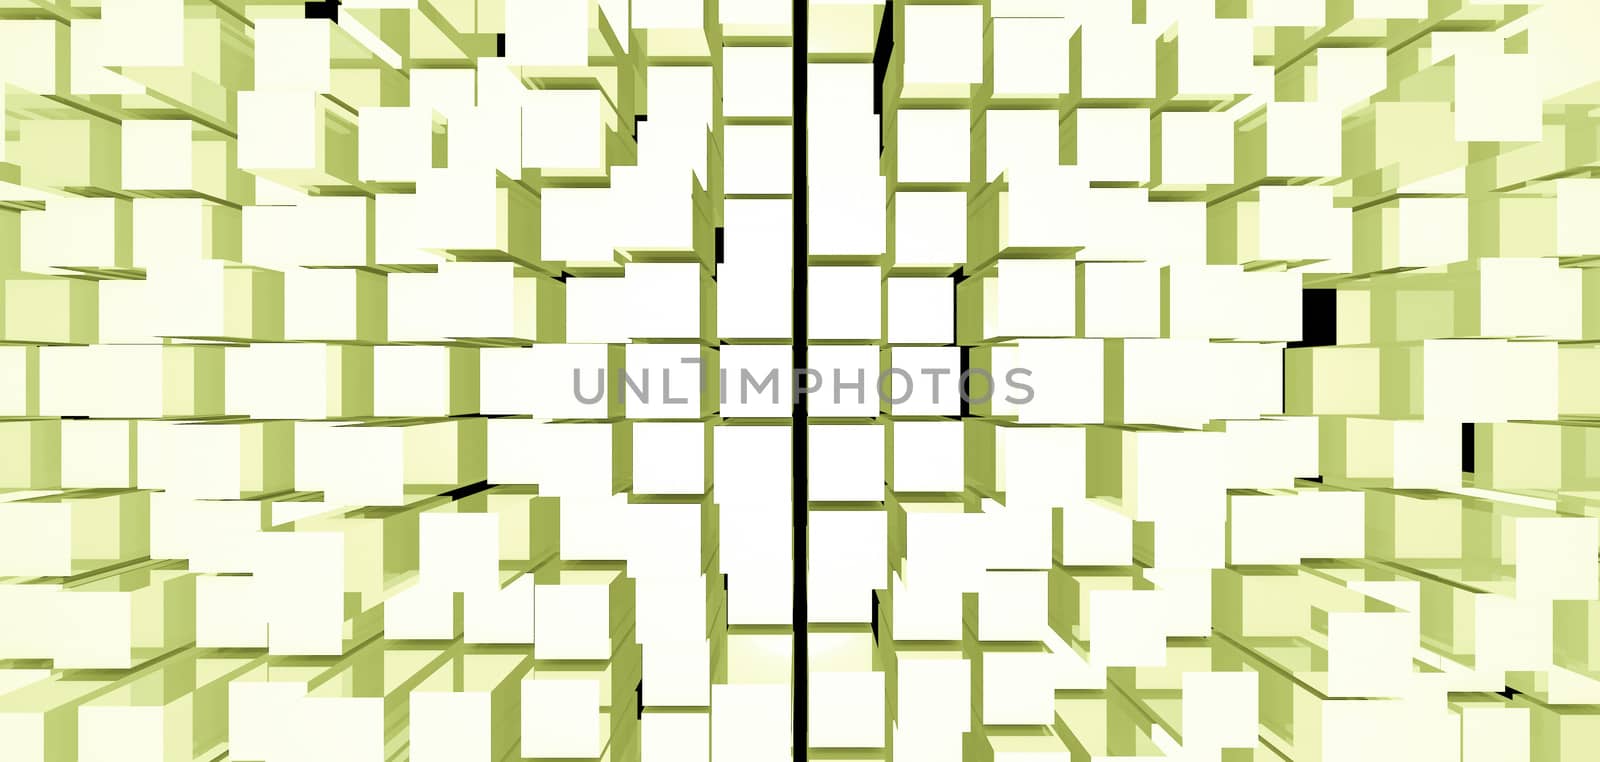 Abstract image of cubes background. 3D rendered backdrop